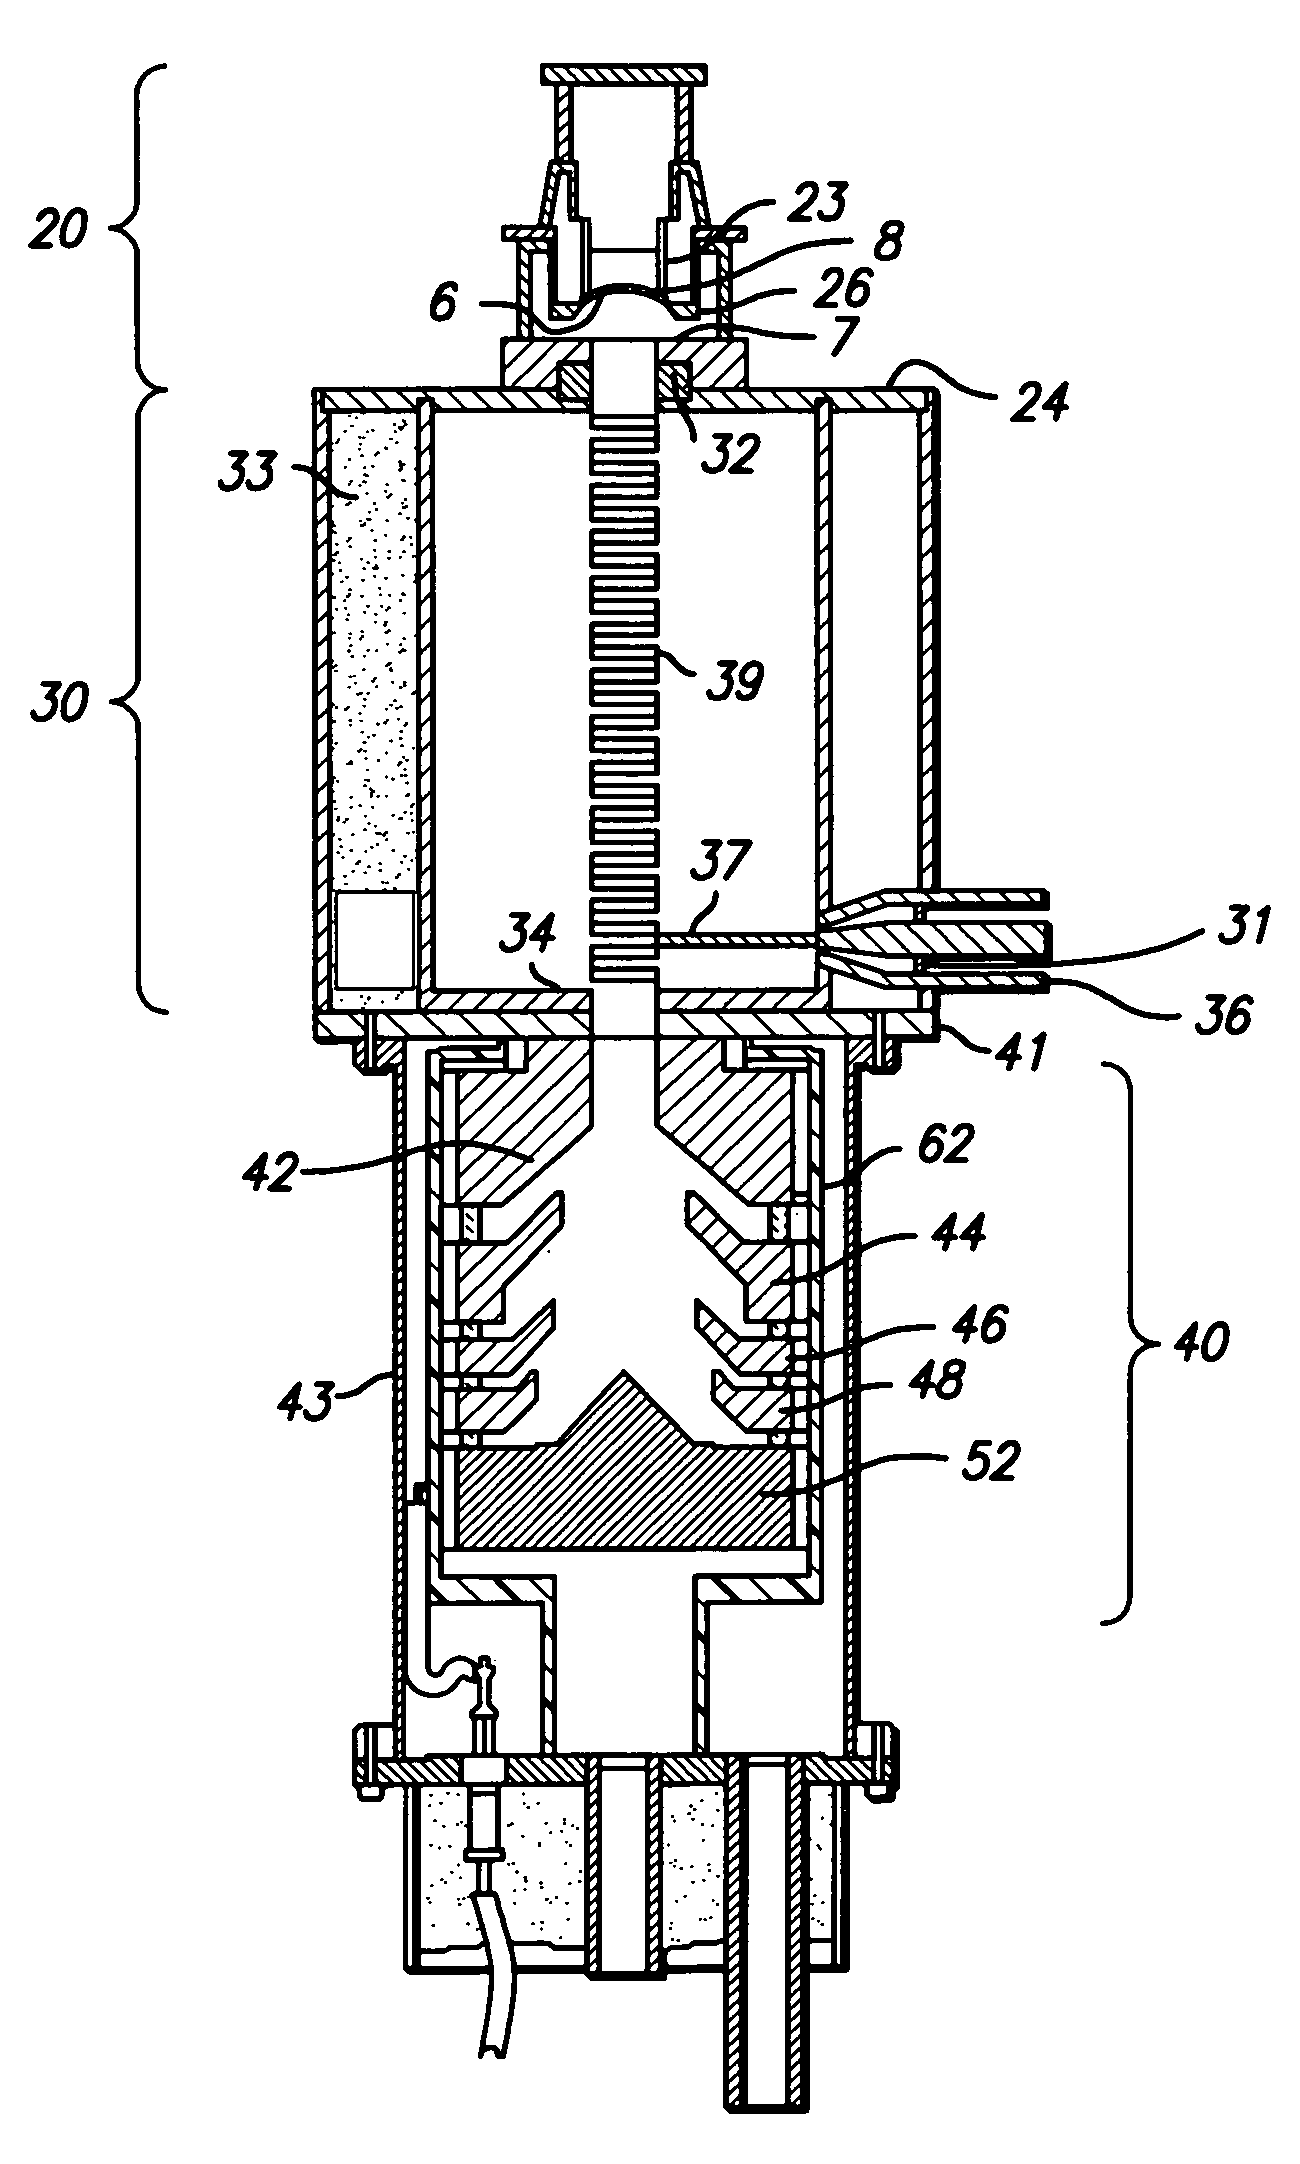 Inductive output tube having a broadband impedance circuit